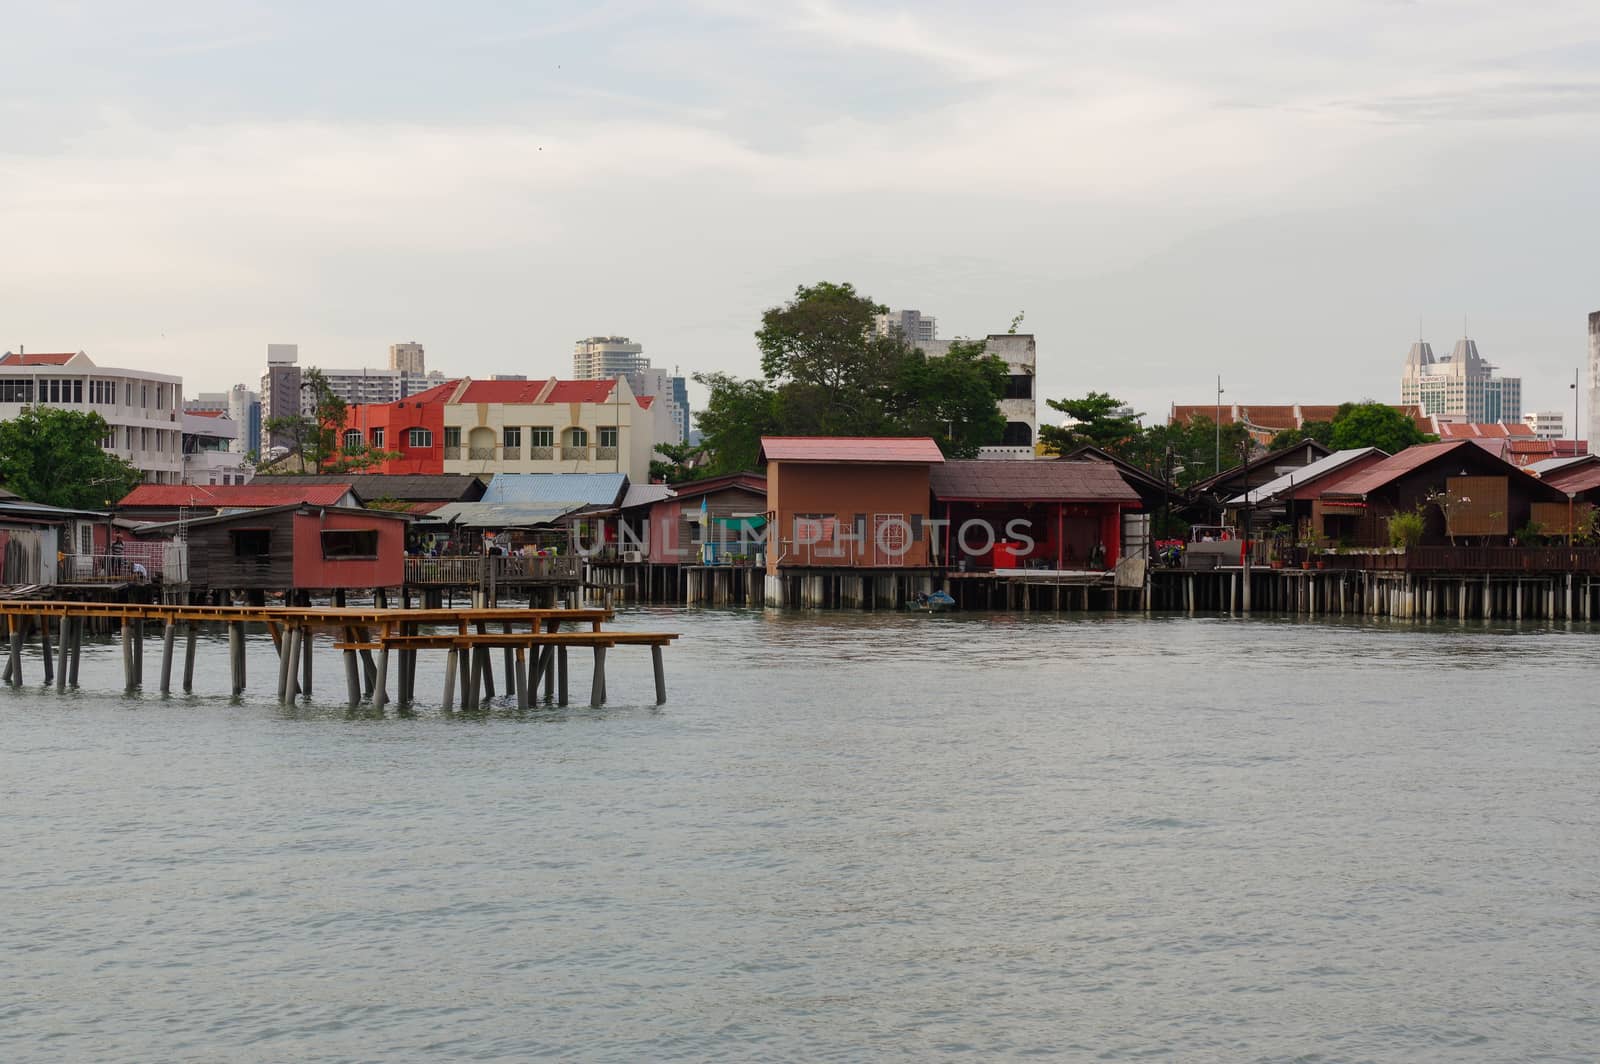 GEORGETOWN, PENANG, MALAYSIA - APRIL 18, 2016: the Lee Jetty is a small village built on water by the Chinese clan in the 19th century, as they could not get land.